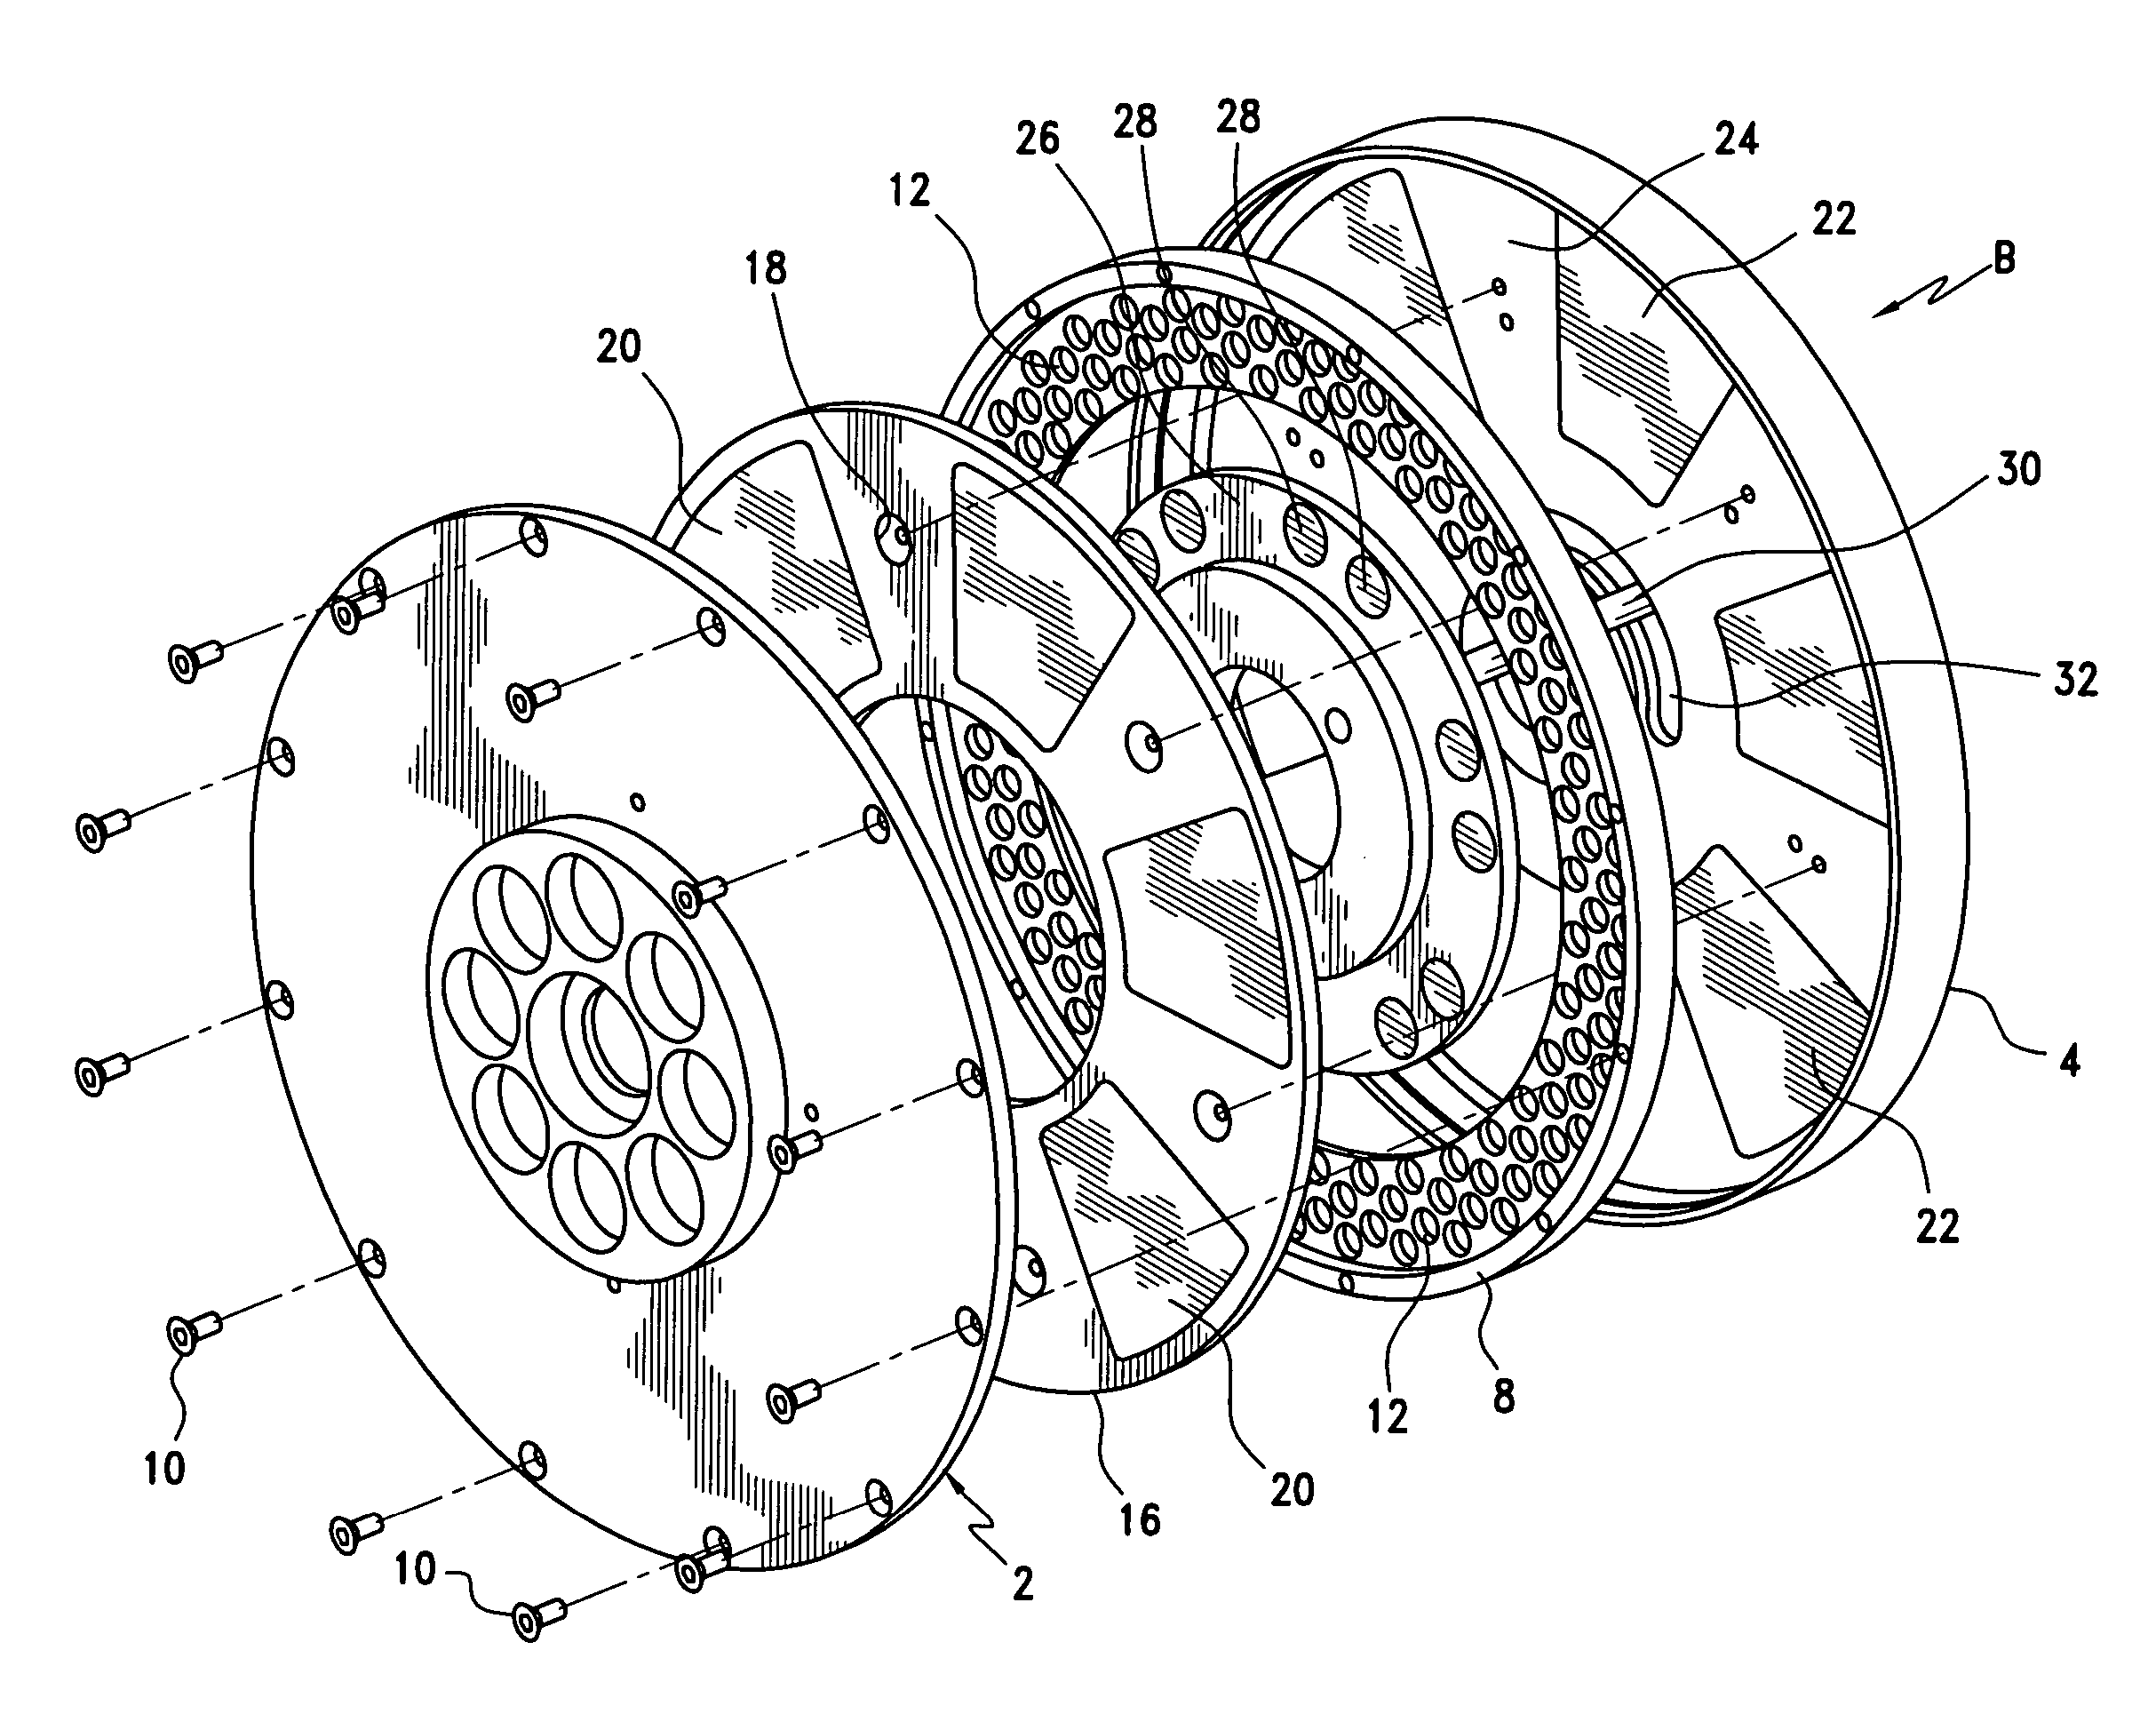 Rotary motion control device